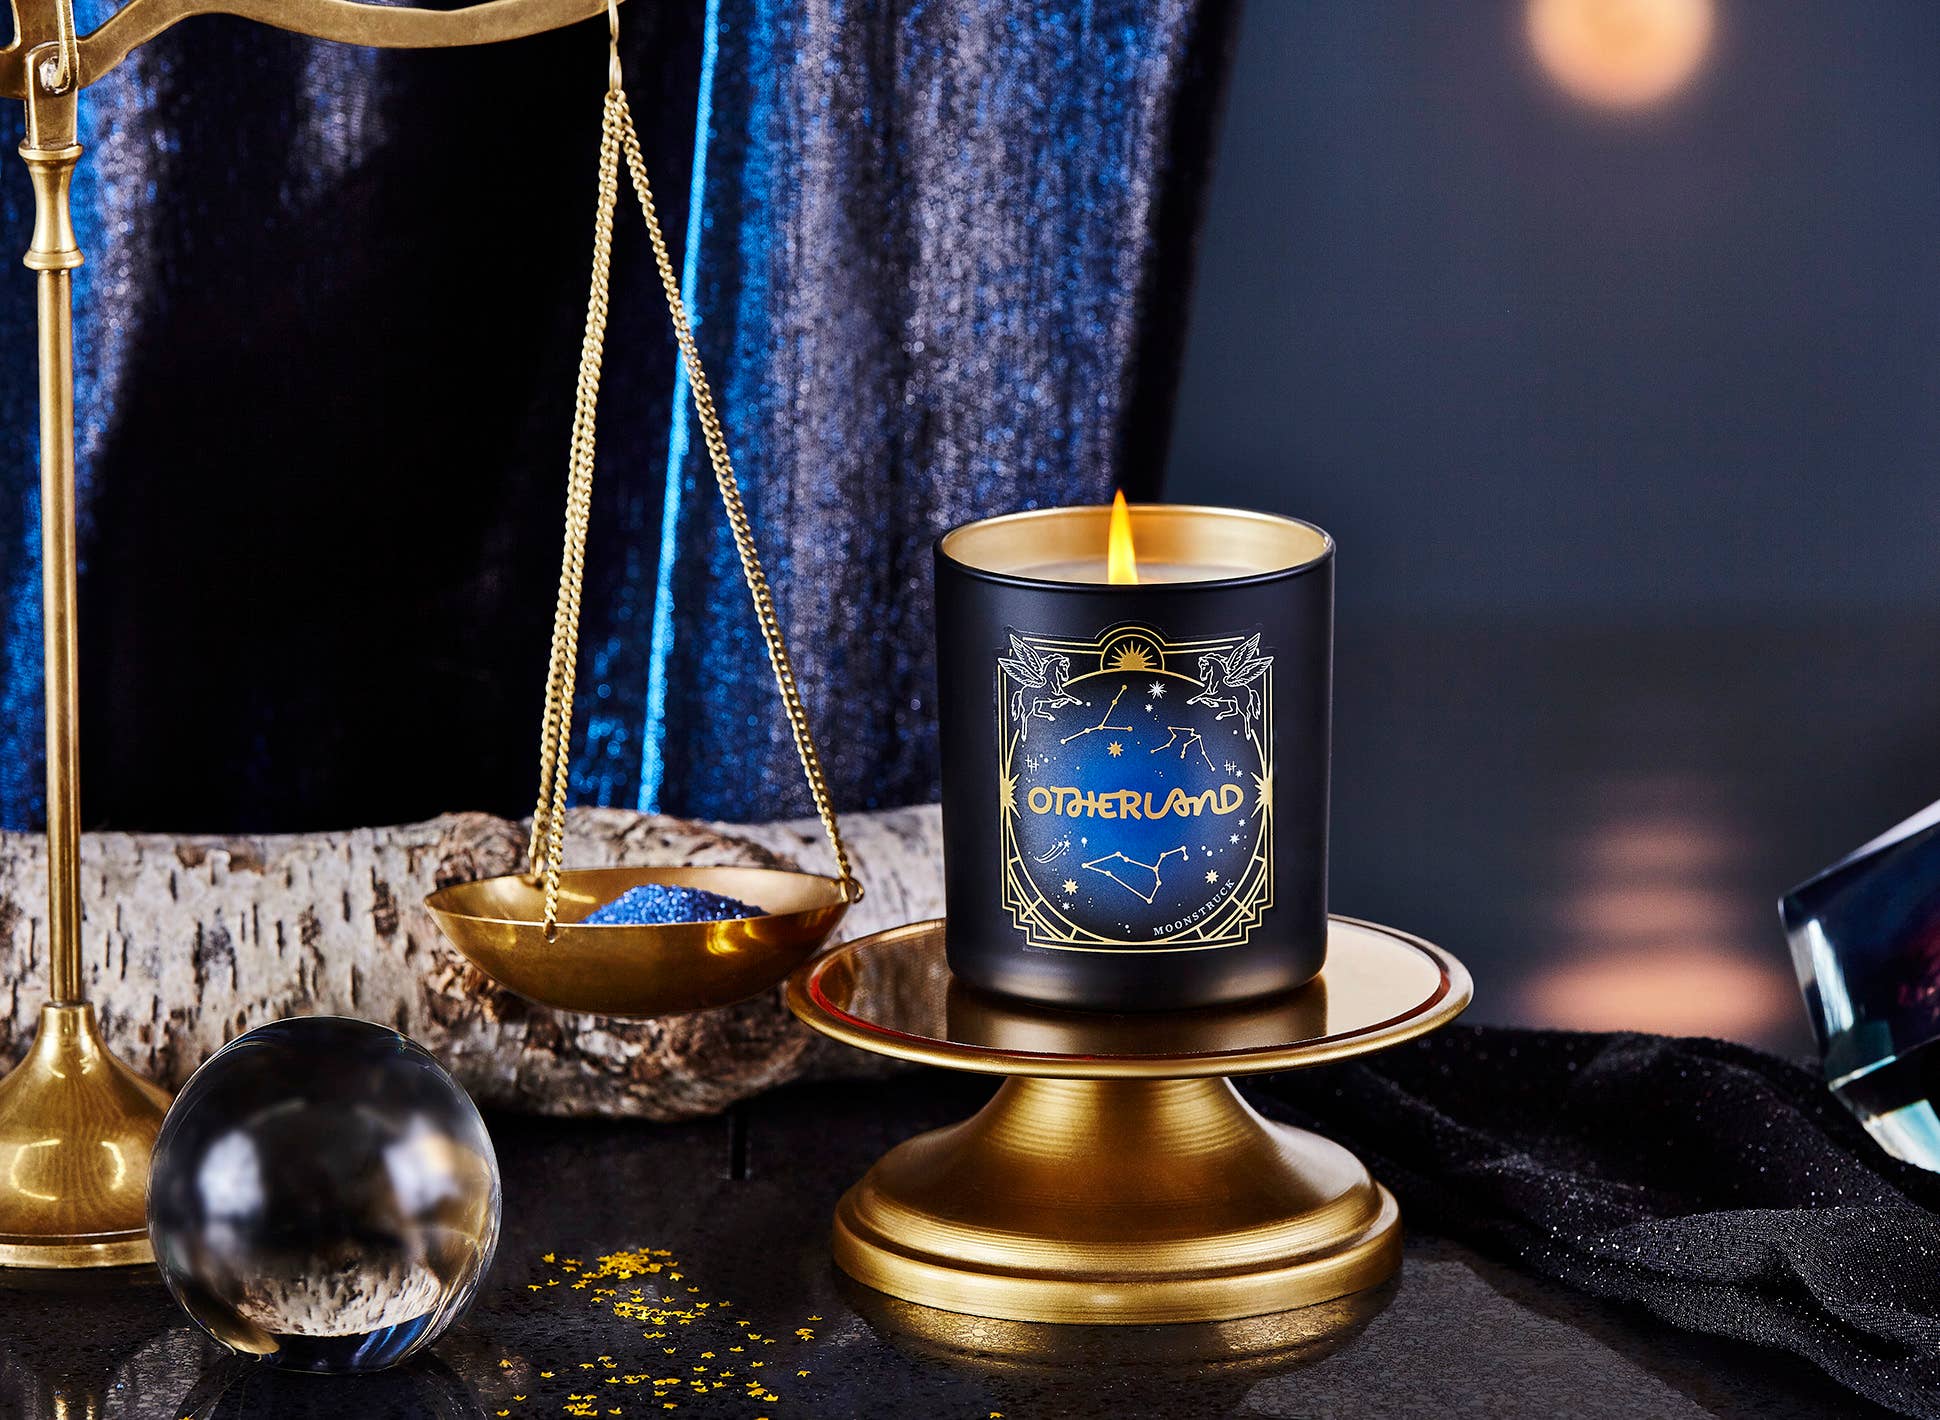 Moonstruck Candle